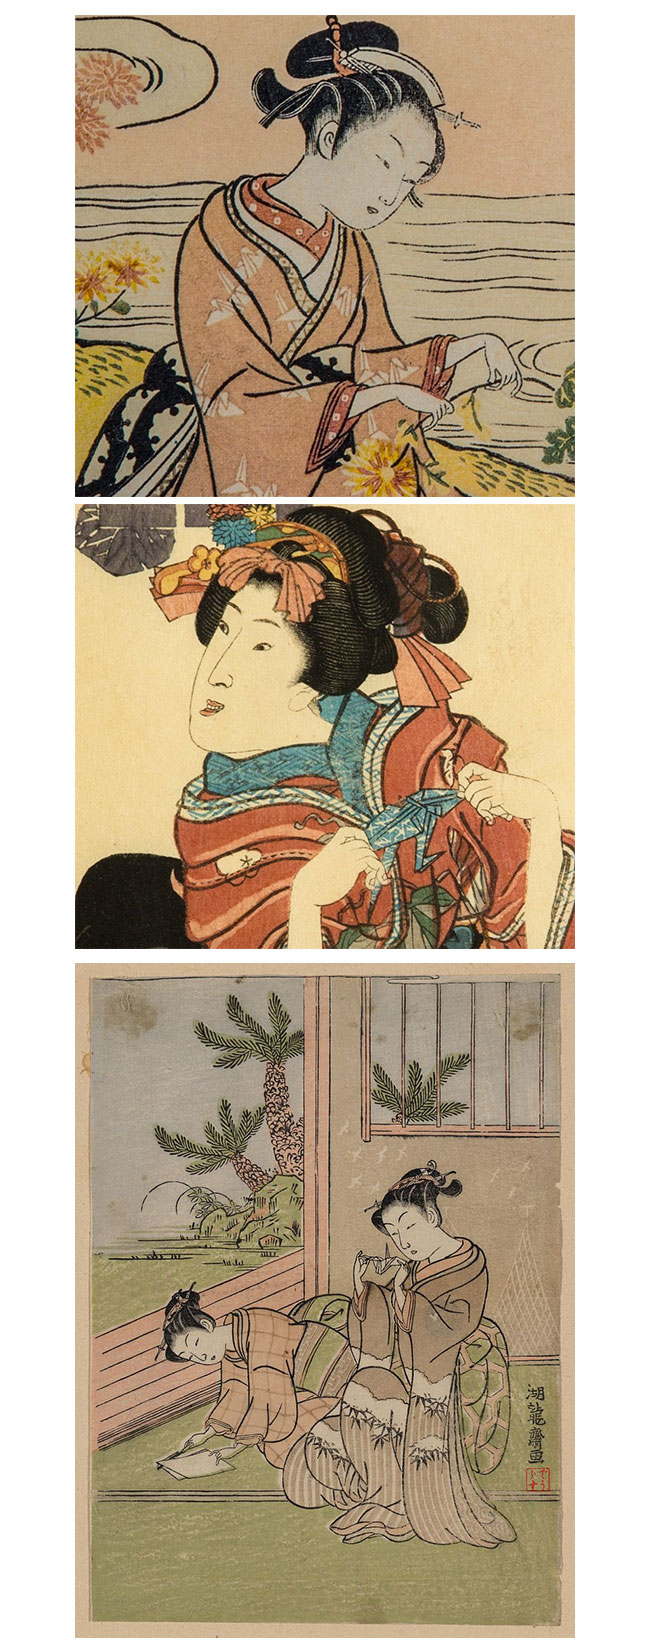 <P>It is no surprise that it is during the Edo era that recreational folding gained its foothold in Japan. During this long period of relative peace across the country, the Japanese economy grew apace and there was a dramatic flourishing of the arts as patronage broadened to include the newly affluent merchant class. Much of what we recognize today as the Japanese aesthetic dates from the Edo period.<BR><BR>It is through ukiyo-e that we can see how widespread in Japanese society paper folding had become. This most egalitarian of art forms often pictured scenes of everyday life. These provide evidence of kimono fabrics with origami designs and of ladies holding their folded creations.  <BR> <BR>The spread of origami was also aided by the flourishing of the paper-making industry during the Edo period, creating a plentifully supply of this essential raw material. (<A href=